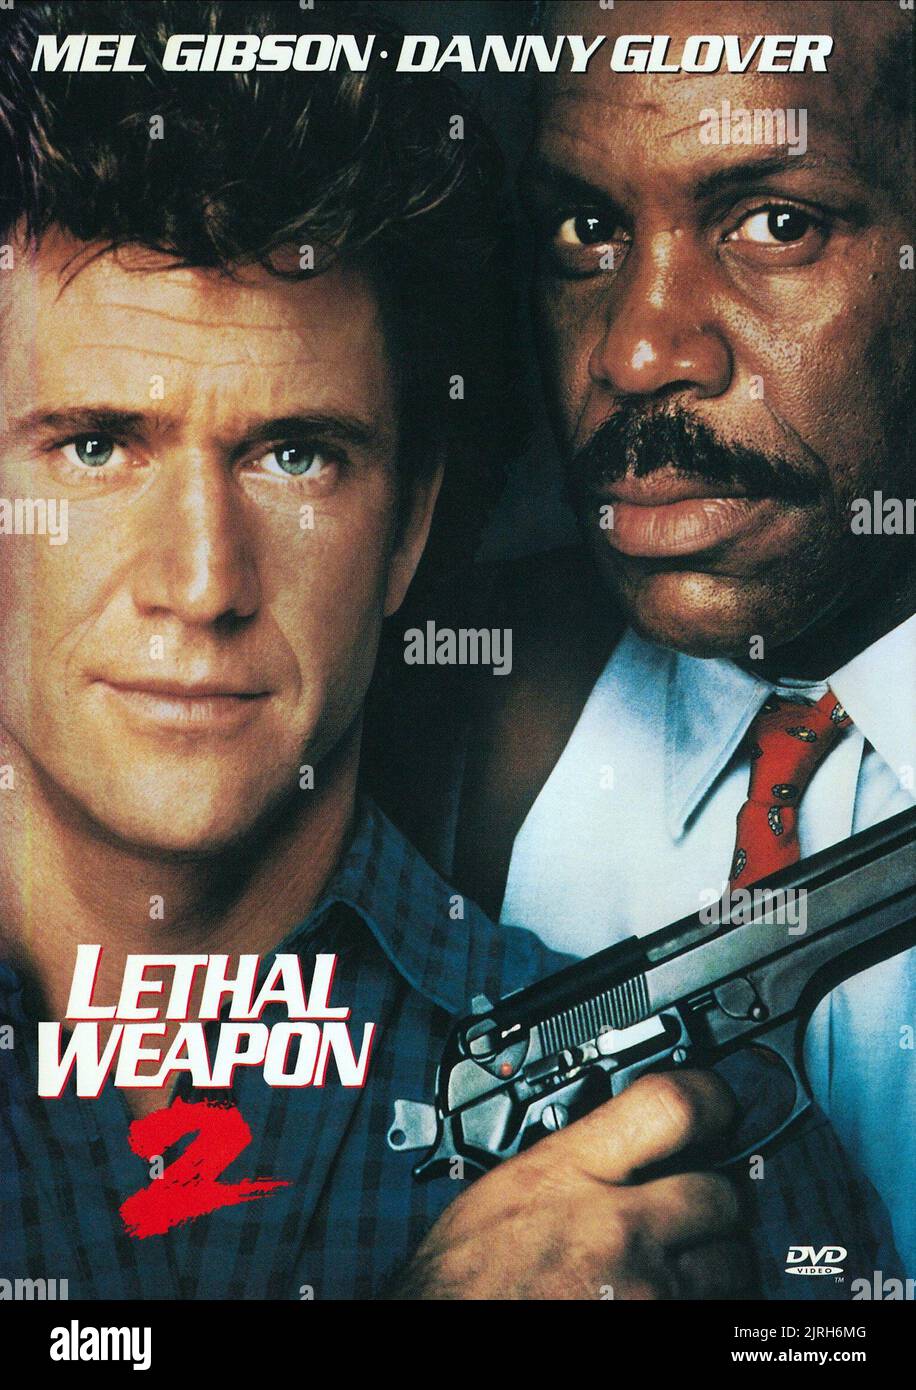 MEL GIBSON, Danny Glover, Plakat, Lethal Weapon 2, 1989 Stockfoto